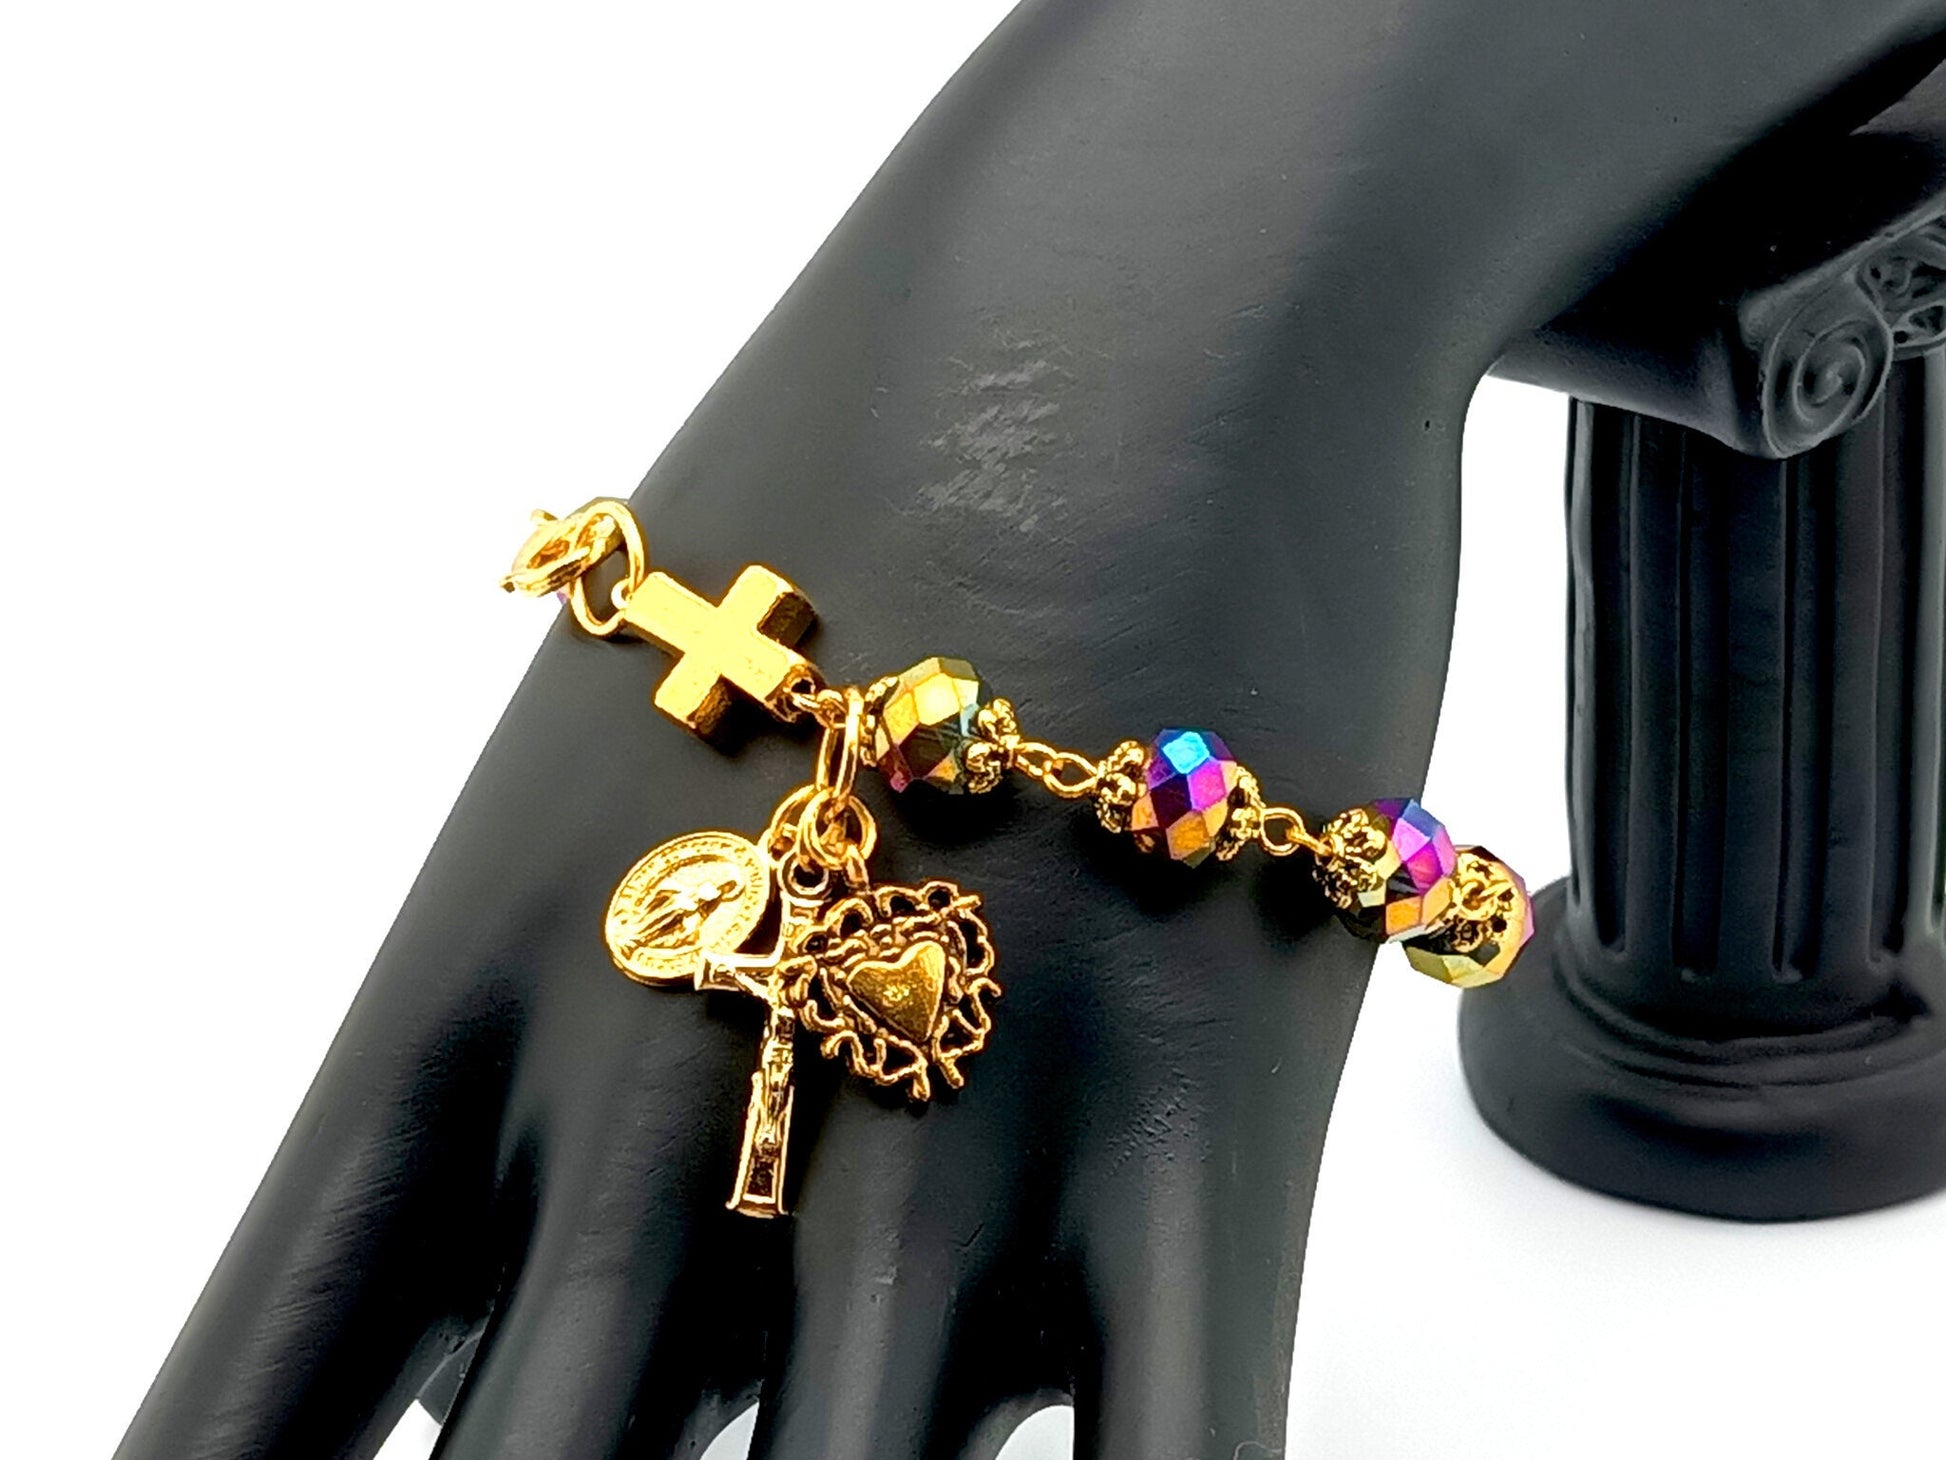 Miraculous medal unique rosry beads single decade rosary bracelet with purple and gold faceted glass beads and gold heart medal and crucifix.